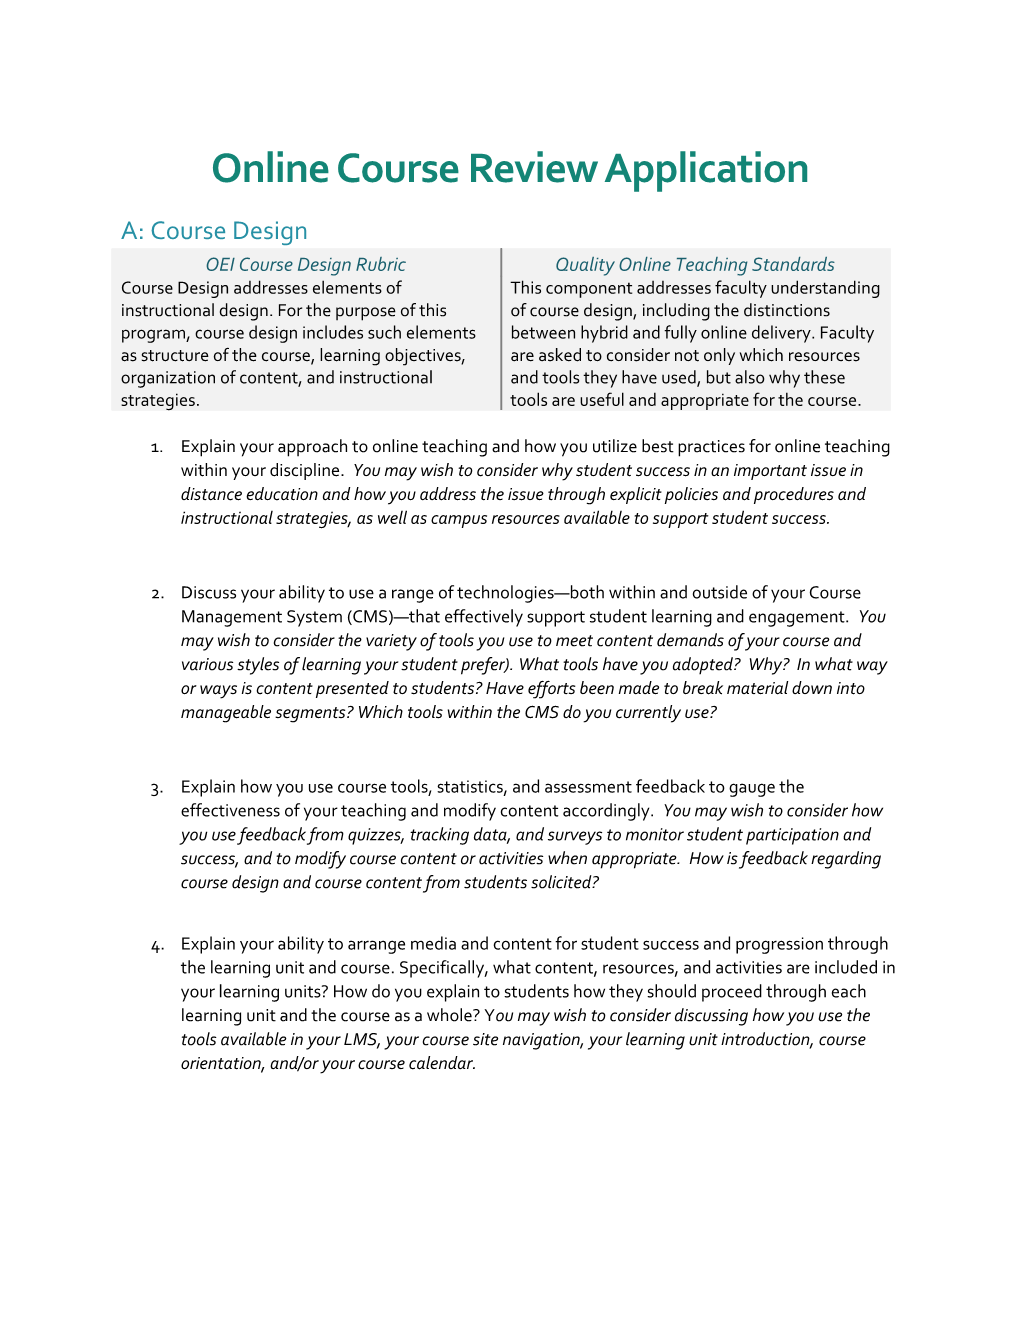 Online Course Review Application